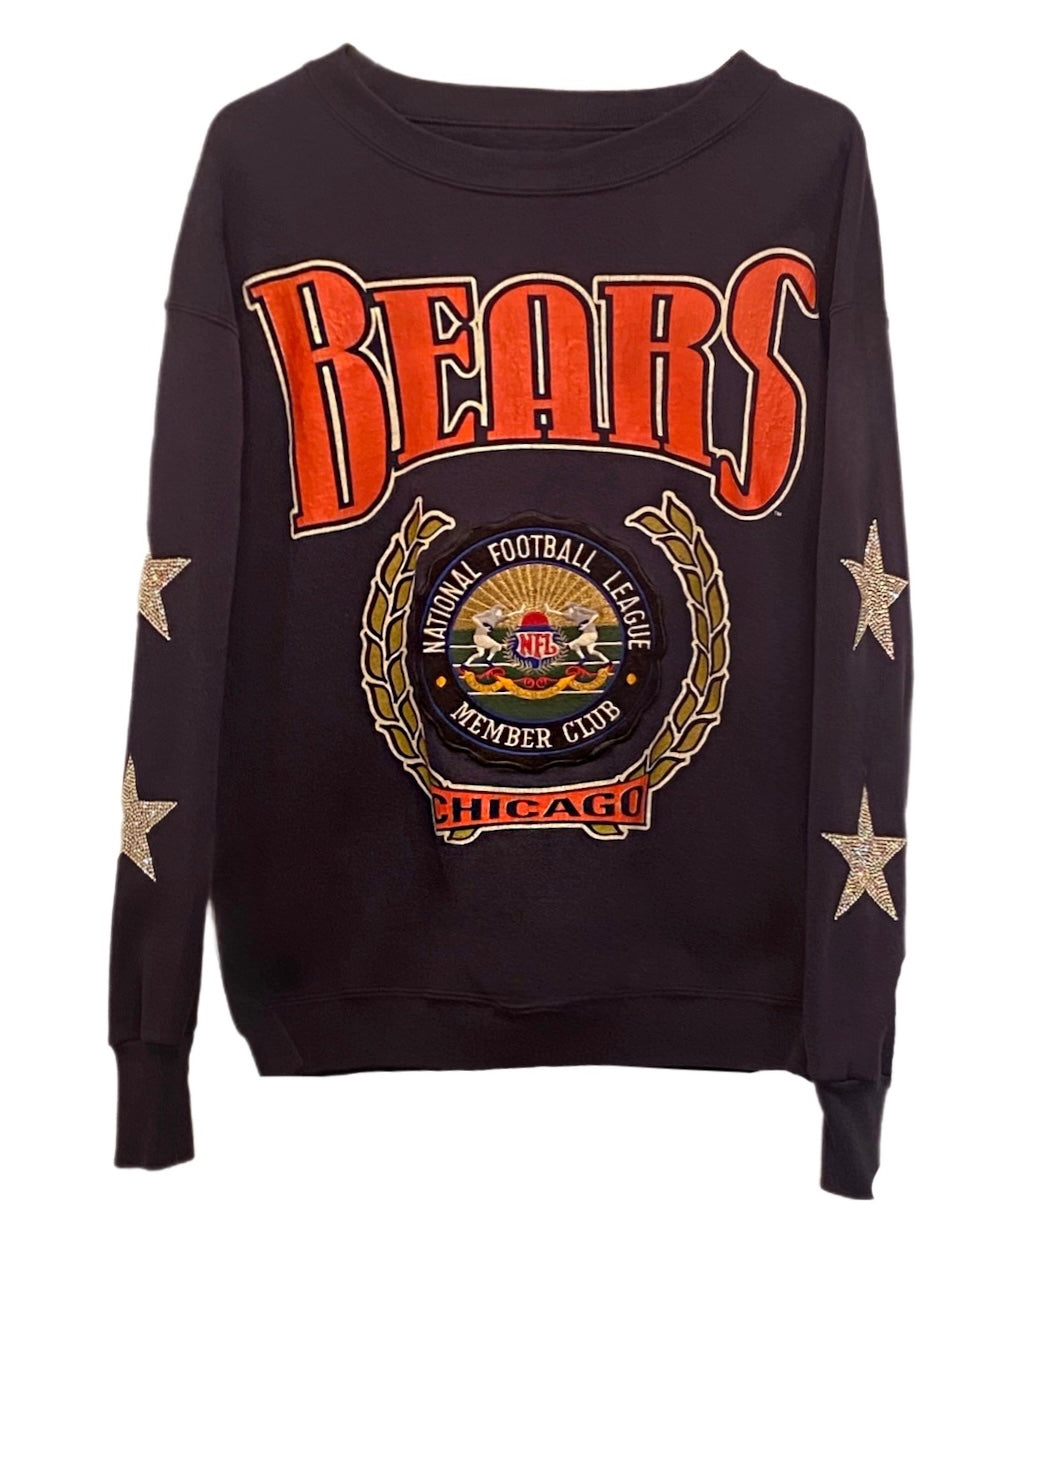 Chicago Bears, NFL One of a KIND Vintage Sweatshirt with Crystal Star Design